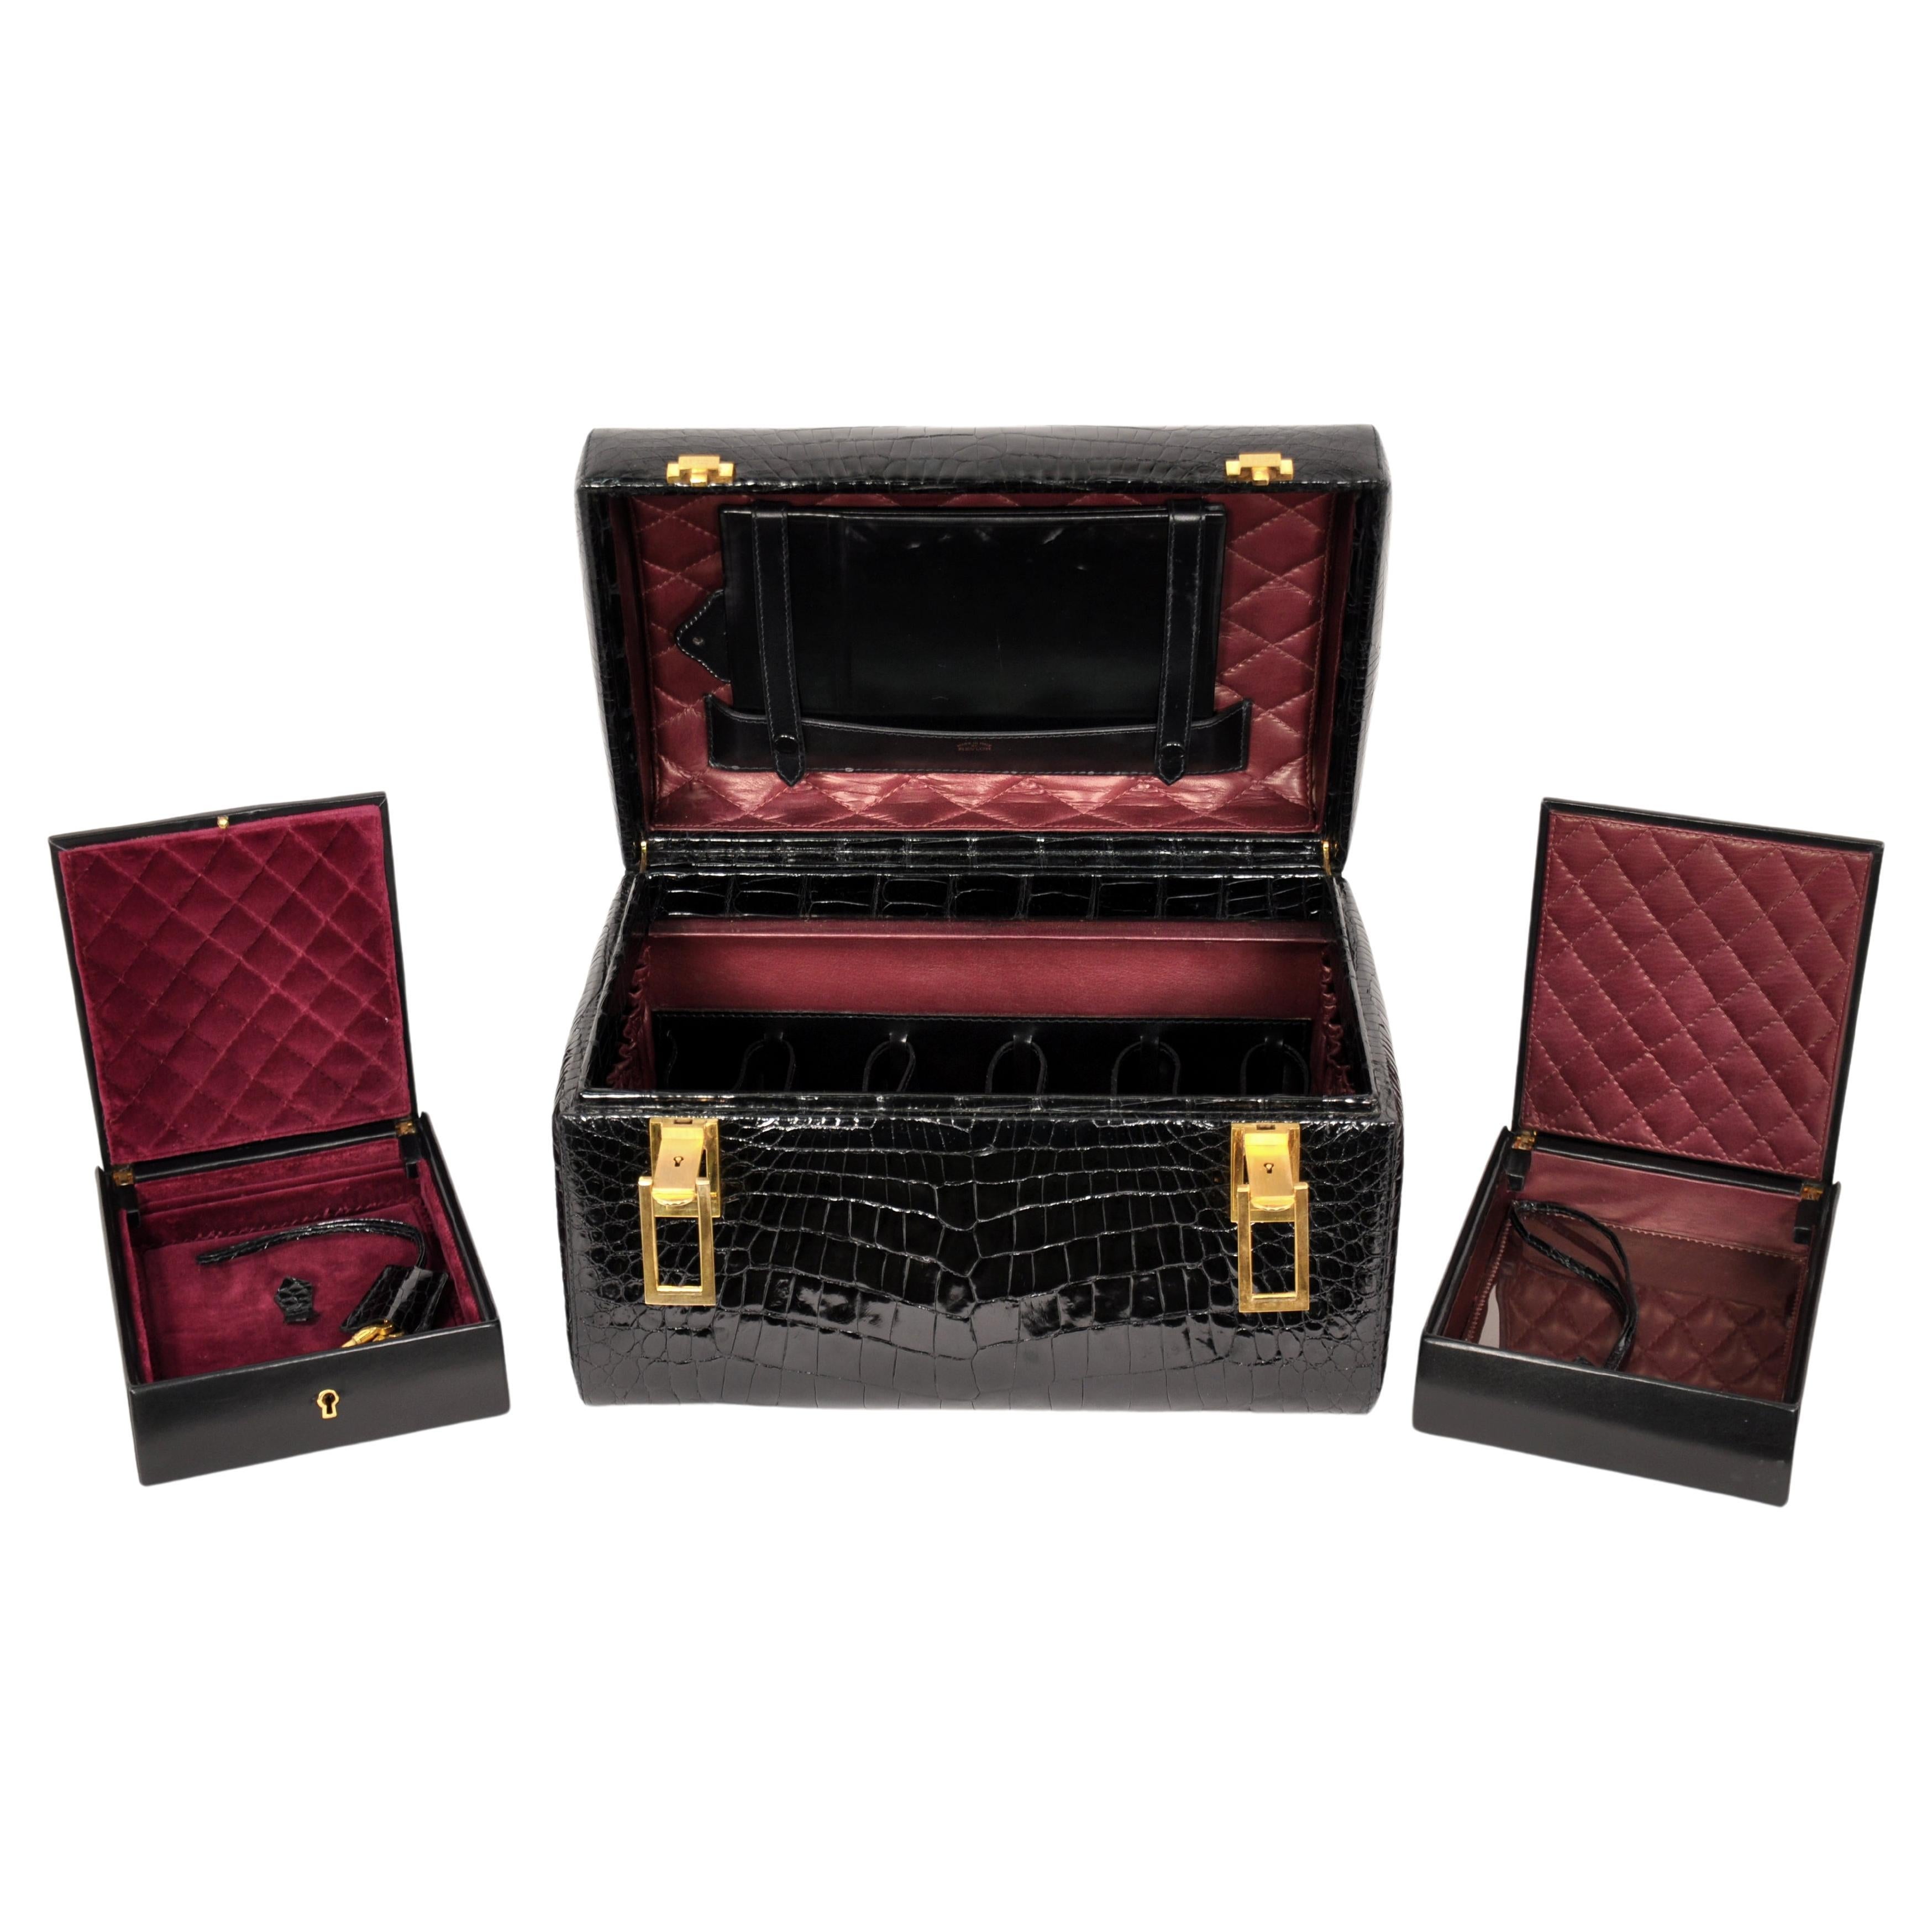 Embrace elegance and style with this extremely rare, genuine black crocodile train case by Revlon. The mint condition beauty and jewelry case features a perfectly shiny black crocodile exterior with brass hardware, accents and feet. The luxurious